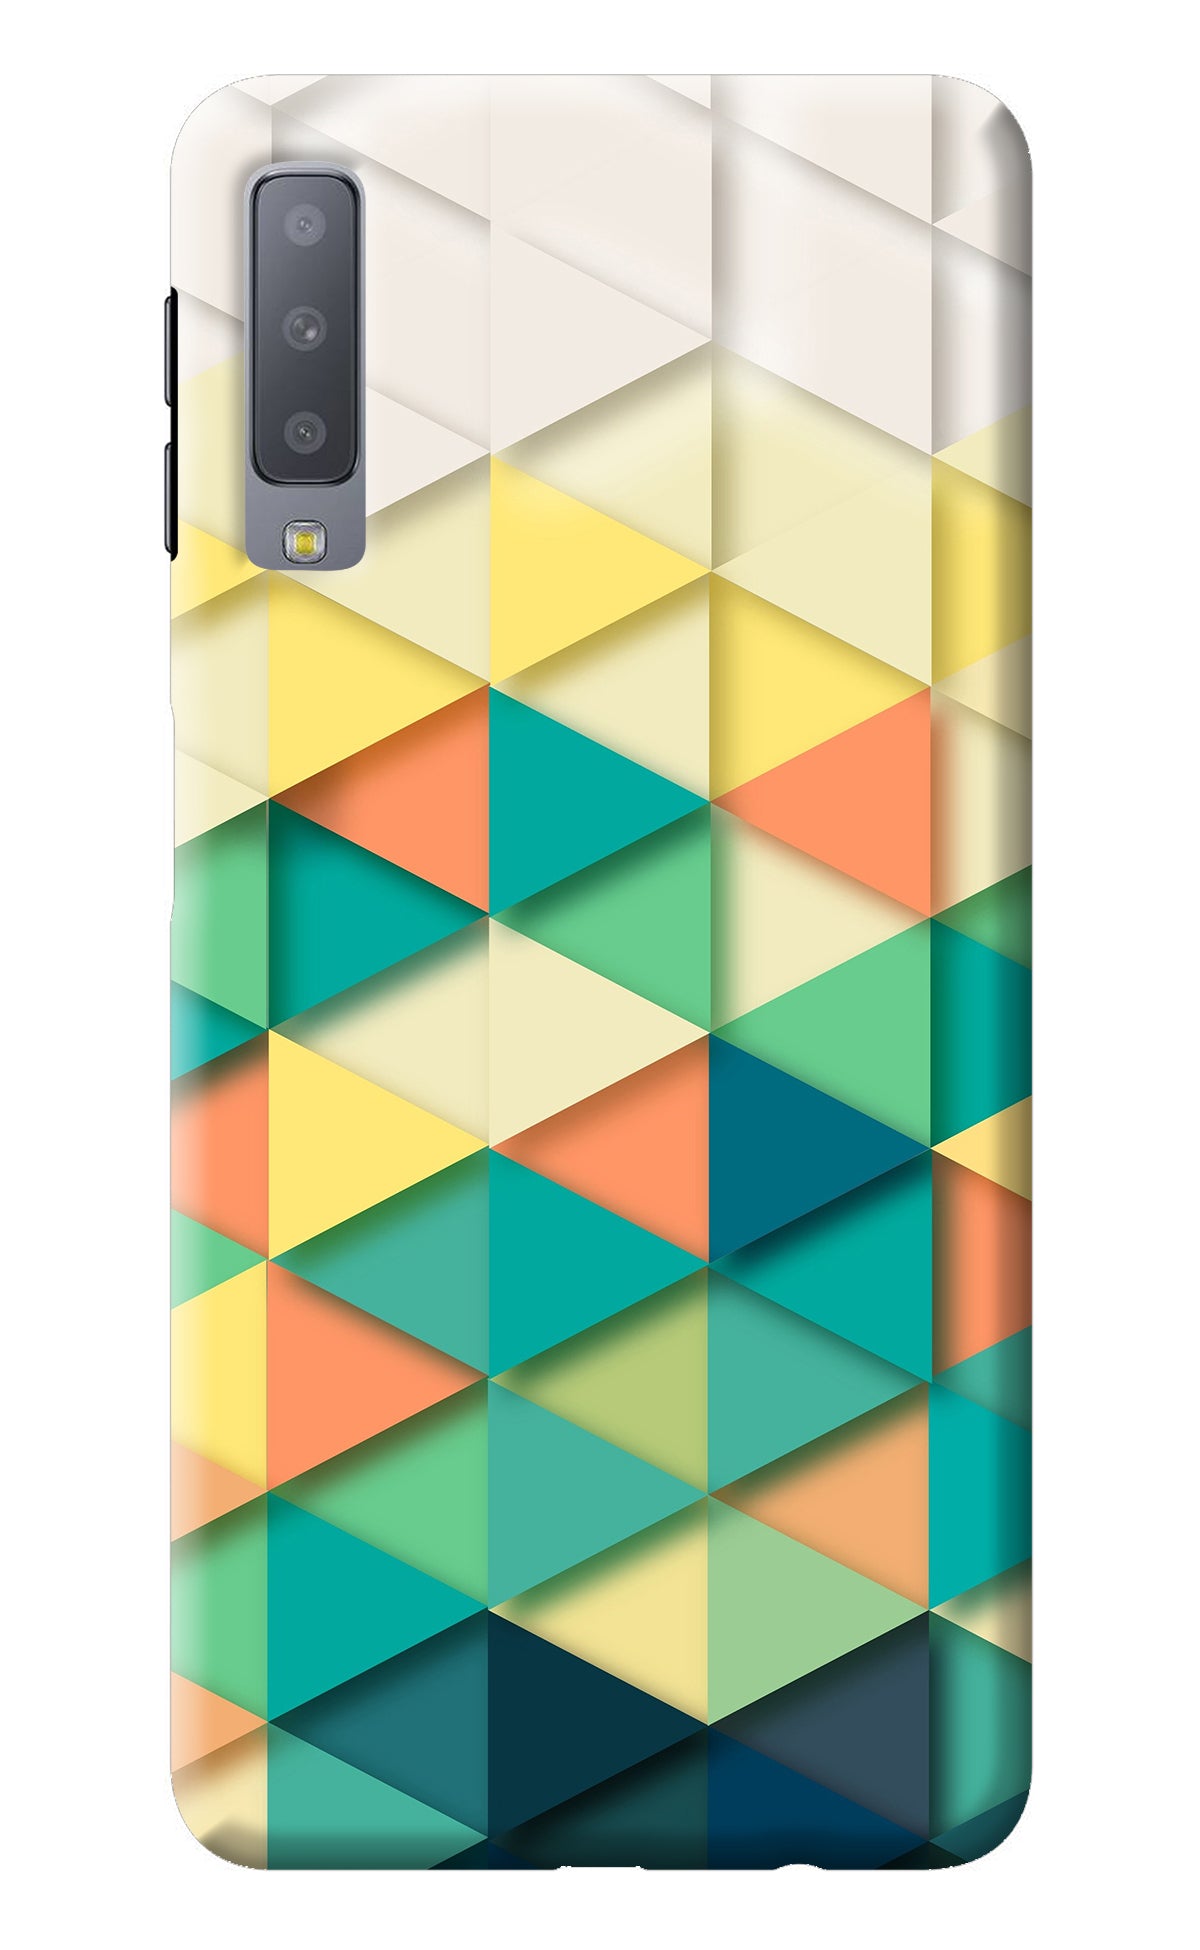 Abstract Samsung A7 Back Cover